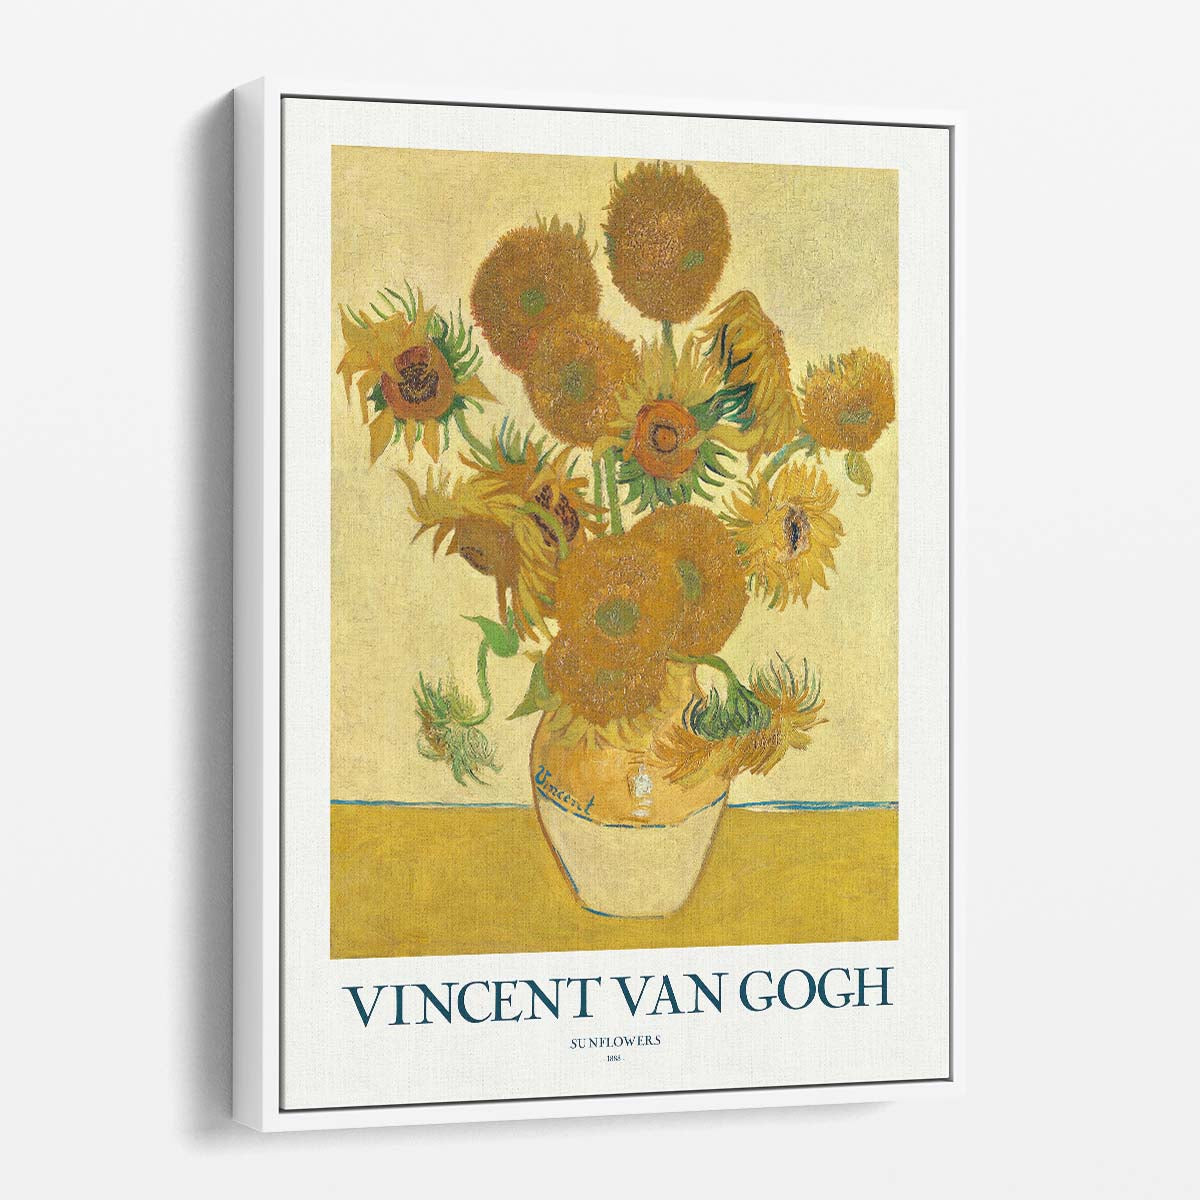 Vincent Van Gogh's Sunflowers Masterful Acrylic Floral Art Print by Luxuriance Designs, made in USA